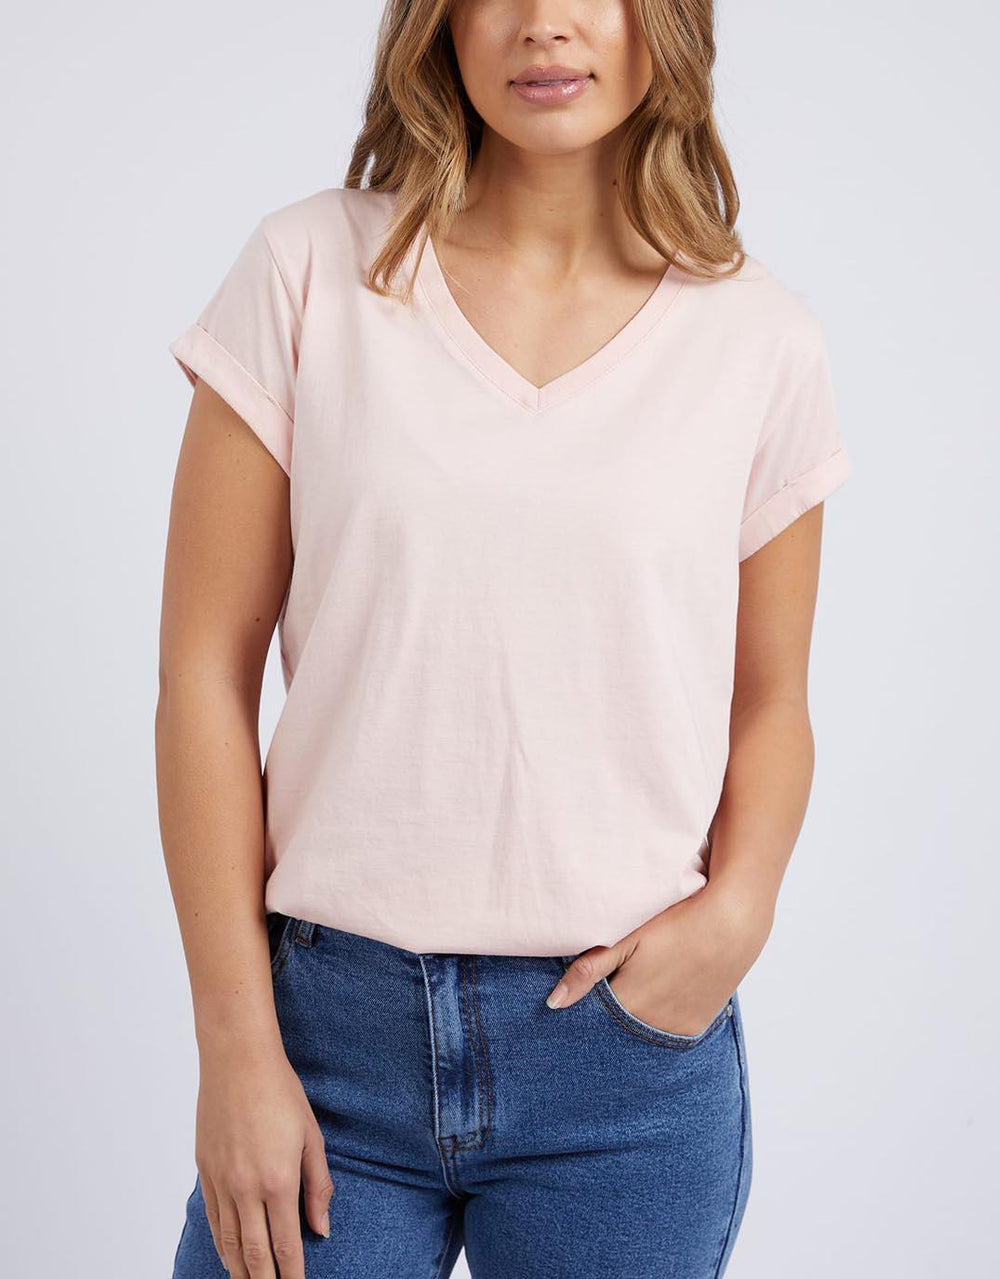 Foxwood - Manly Vee Tee - Peach Pink - White & Co Living Tops